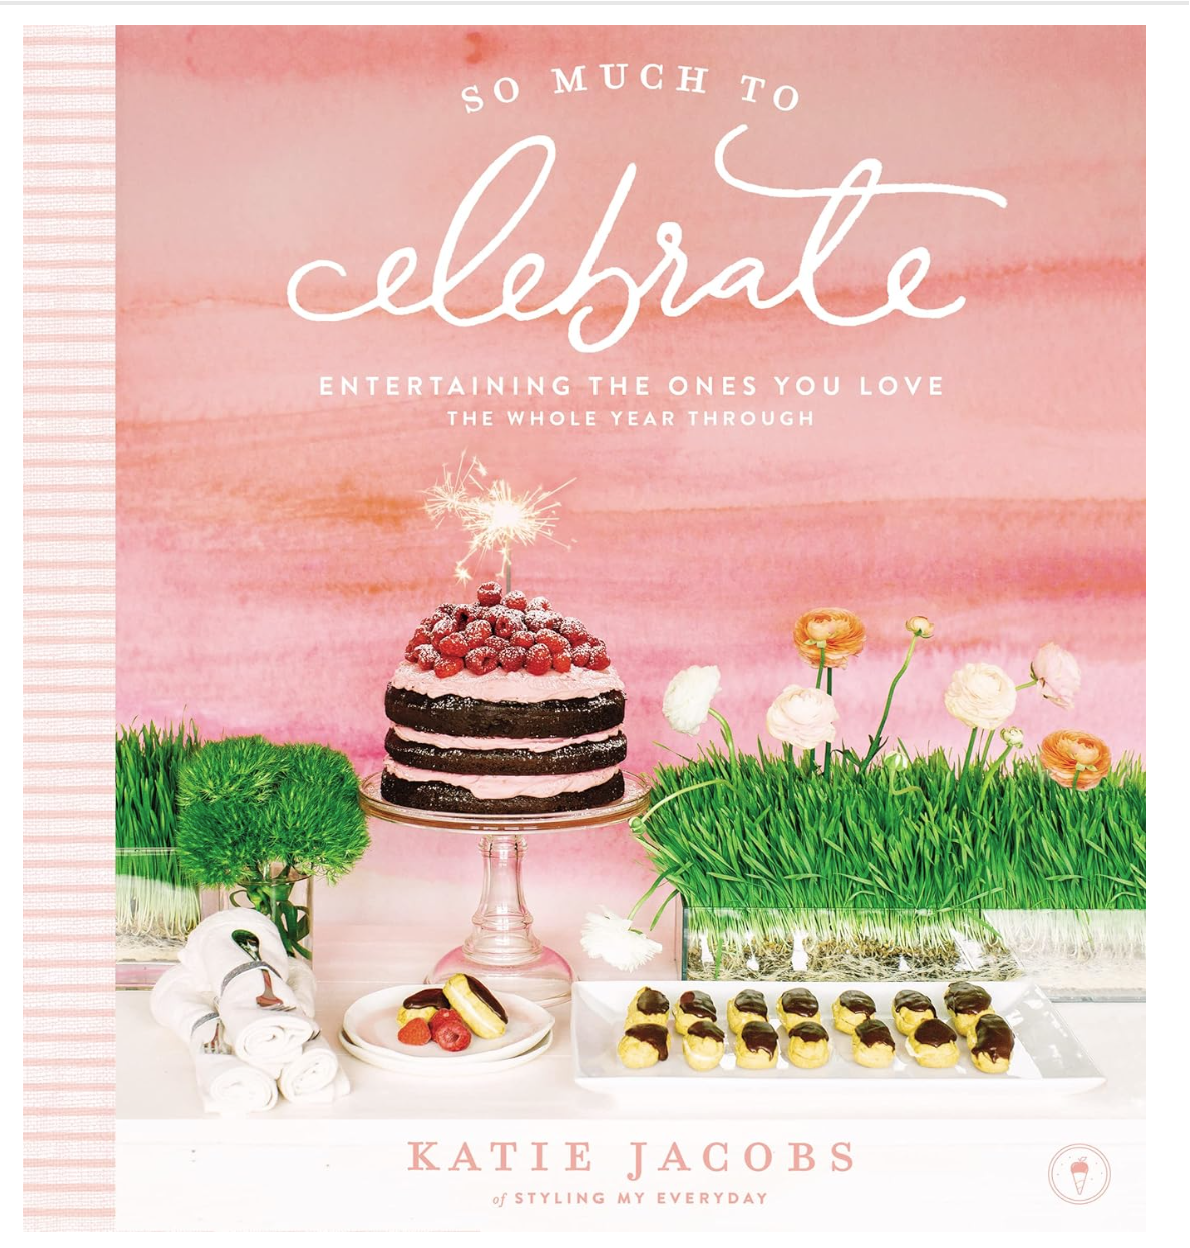 So Much To Celebrate: Entertaining the Ones You Love the Whole Year Through Hardcover – March 6, 2018 by Katie Jacobs (Author)